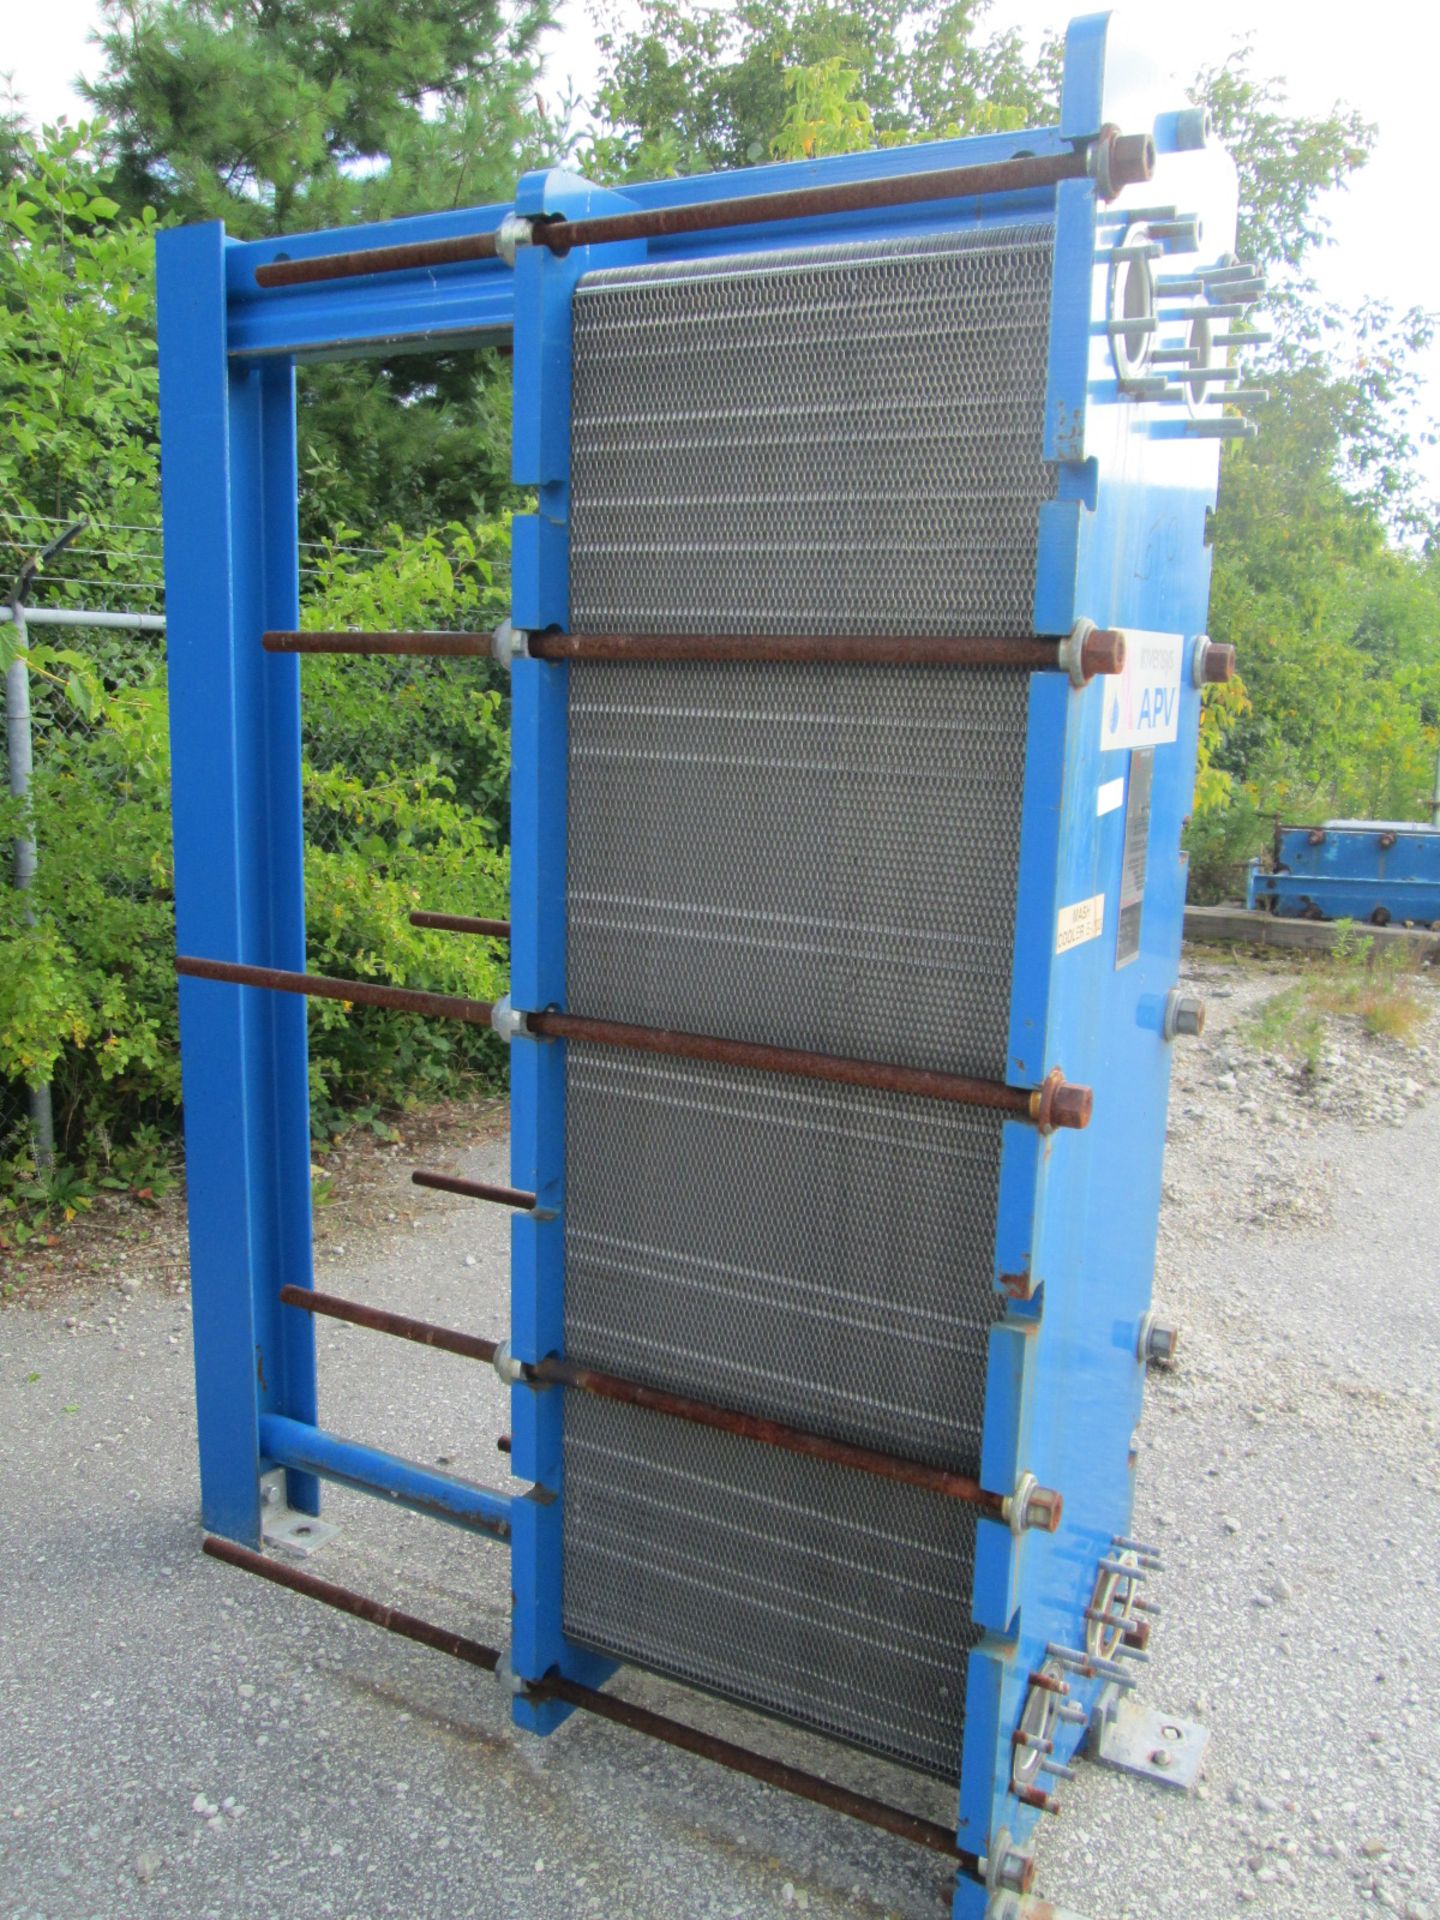 APV Heat Exchanger Model Q080DF / M10 New in 2007. National Board 8444 / CRN M3478.5 - Image 2 of 6